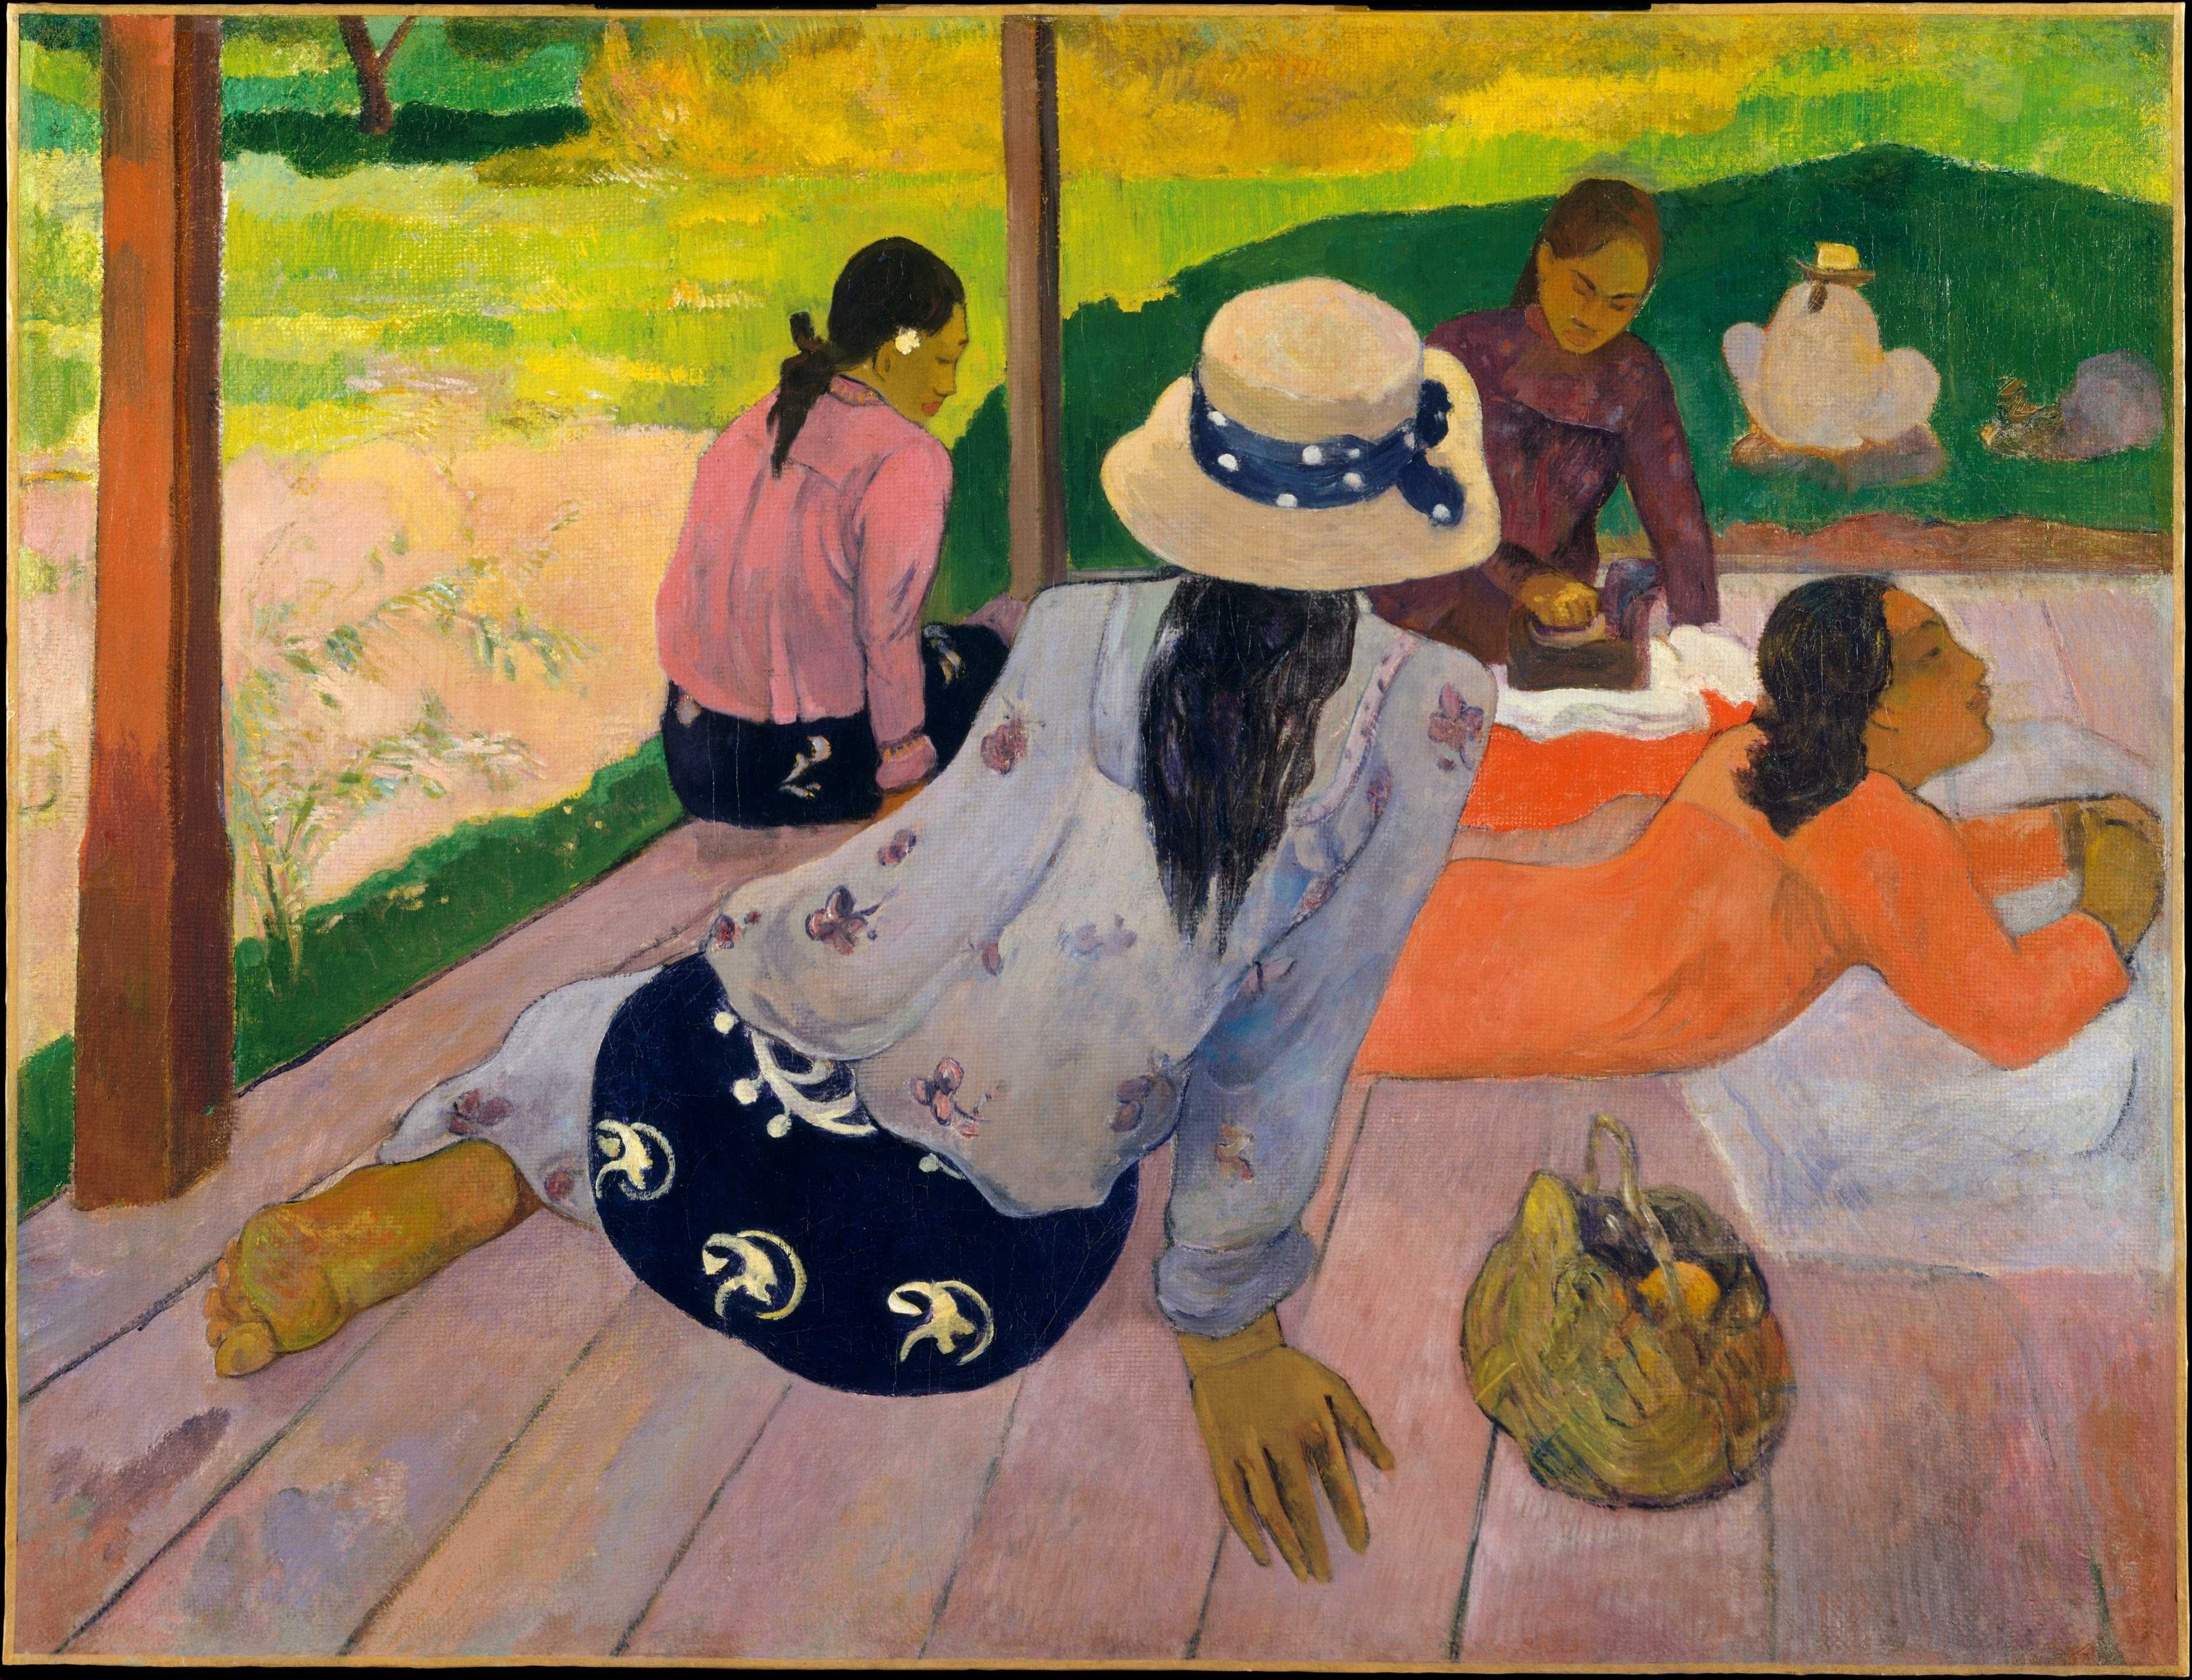 Find out more about Paul Gauguin - The Siesta